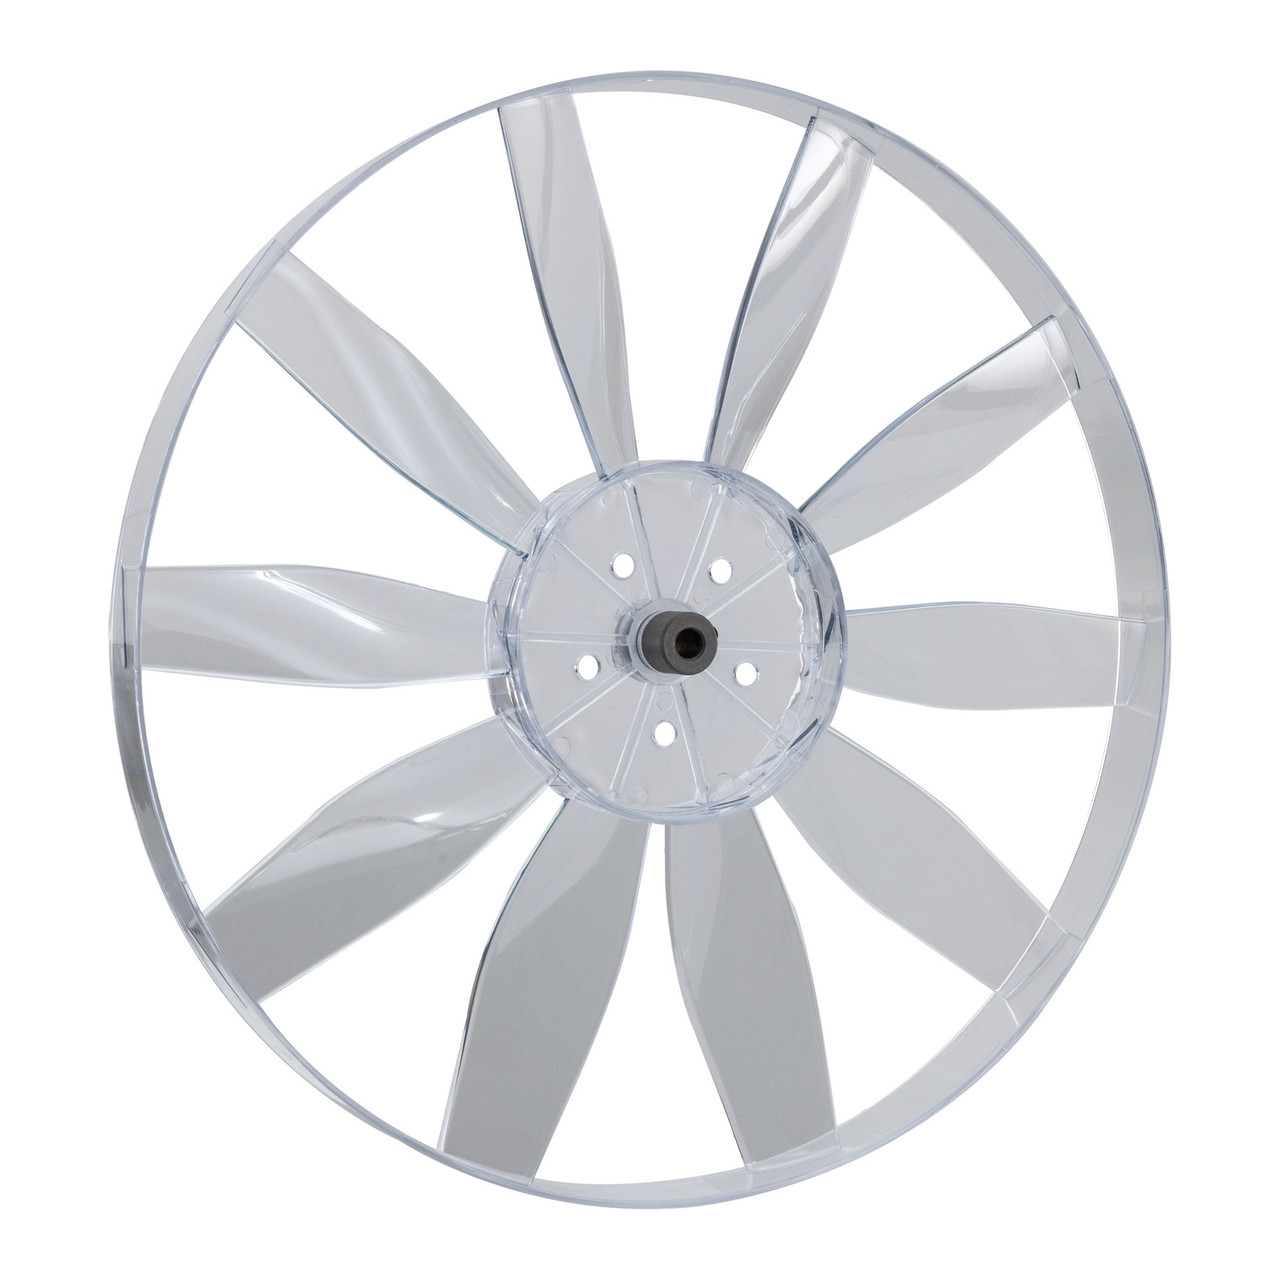 RV Roof Vent Replacement Fan for Vento - RecPro